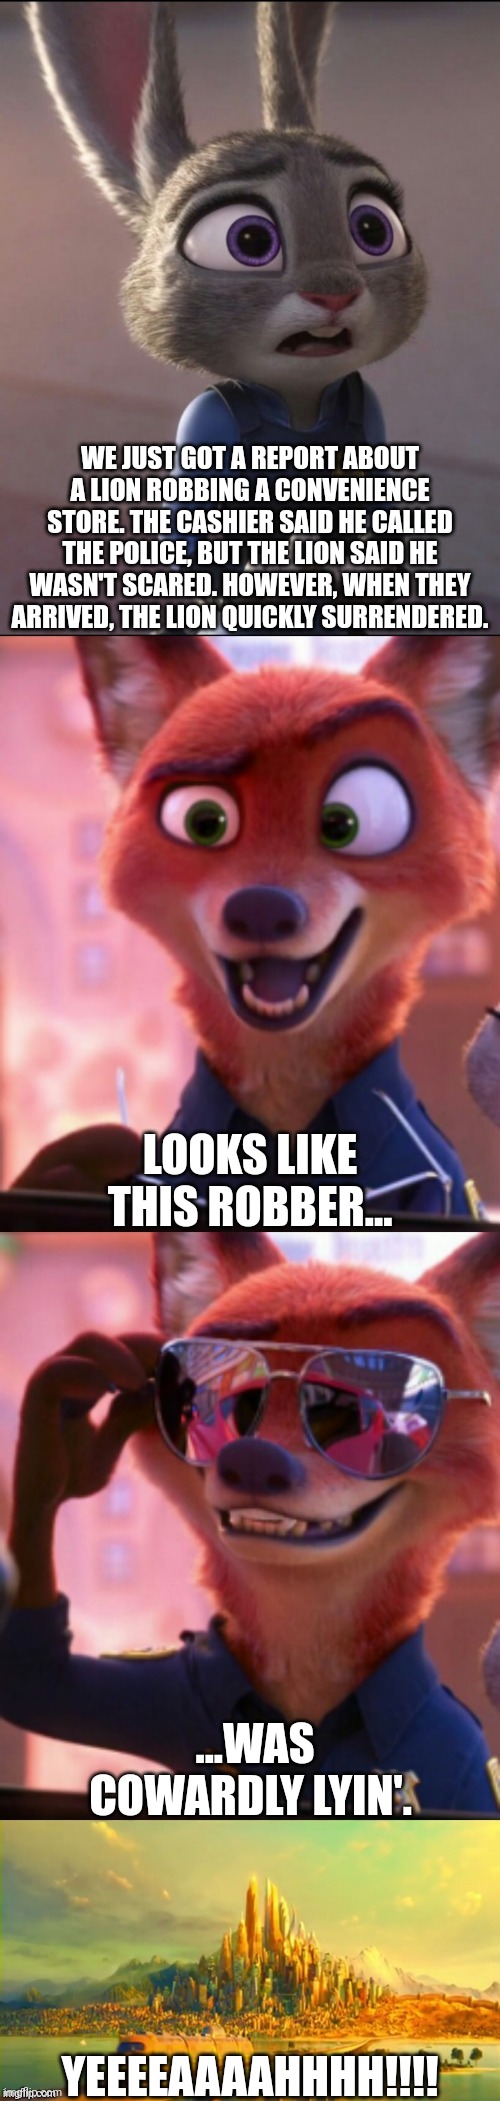 CSI: Zootopia 44 | WE JUST GOT A REPORT ABOUT A LION ROBBING A CONVENIENCE STORE. THE CASHIER SAID HE CALLED THE POLICE, BUT THE LION SAID HE WASN'T SCARED. HOWEVER, WHEN THEY ARRIVED, THE LION QUICKLY SURRENDERED. LOOKS LIKE THIS ROBBER... ...WAS COWARDLY LYIN'. YEEEEAAAAHHHH!!!! | image tagged in csi zootopia,zootopia,judy hopps,nick wilde,parody,funny | made w/ Imgflip meme maker